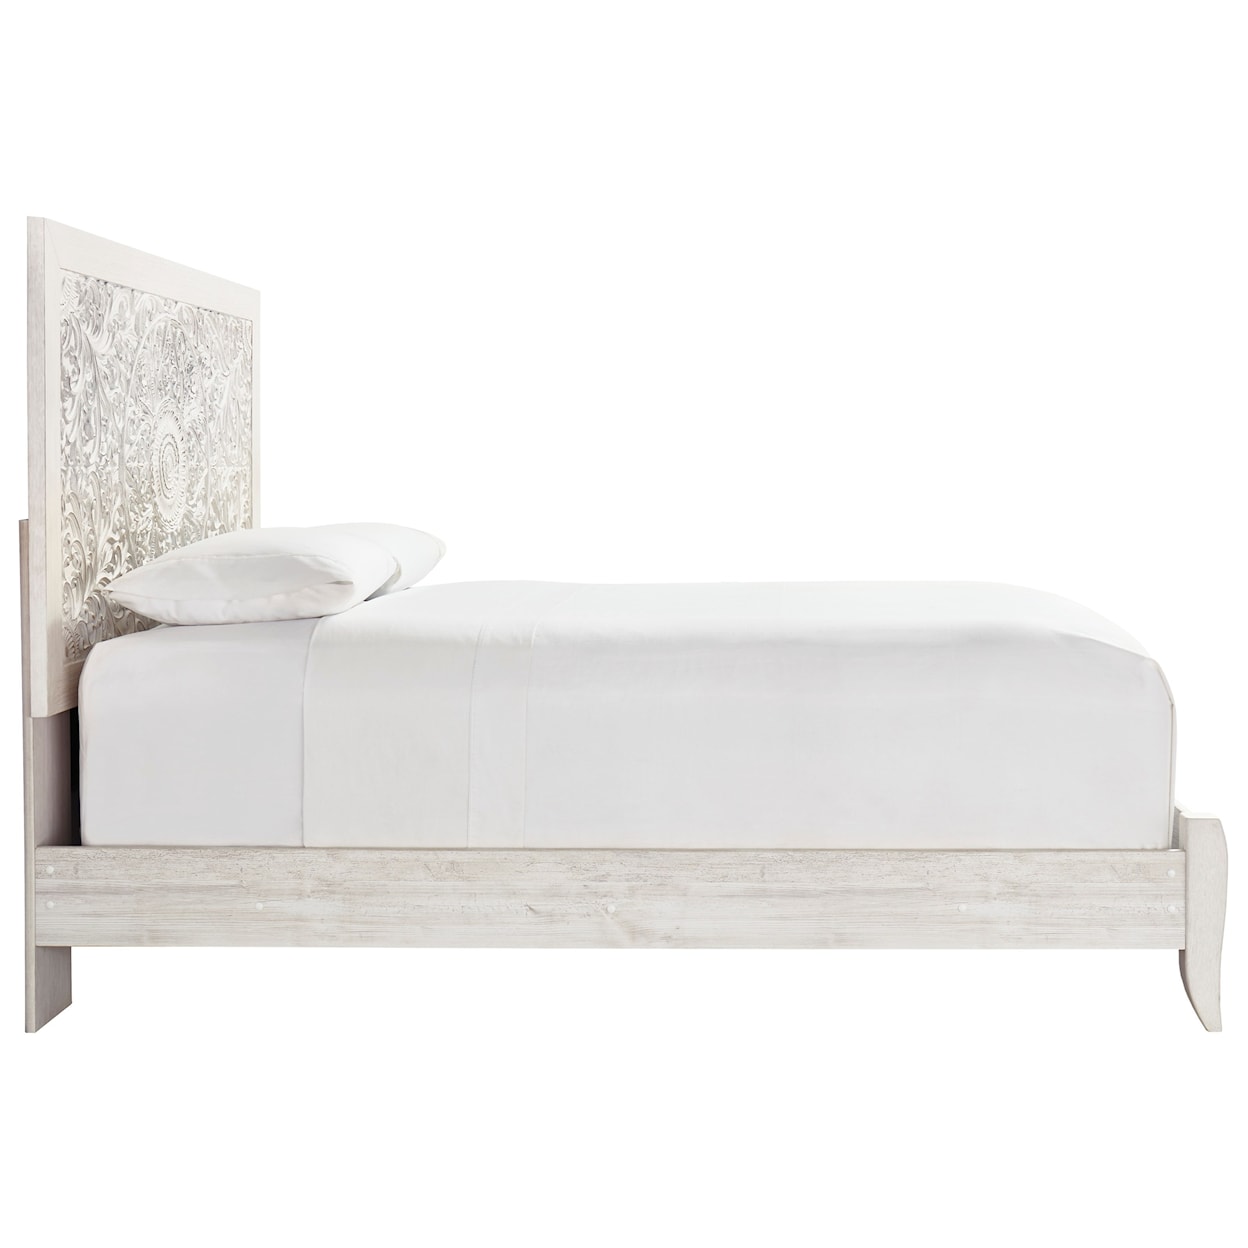 Signature Design by Ashley Paxberry Queen Panel Bed